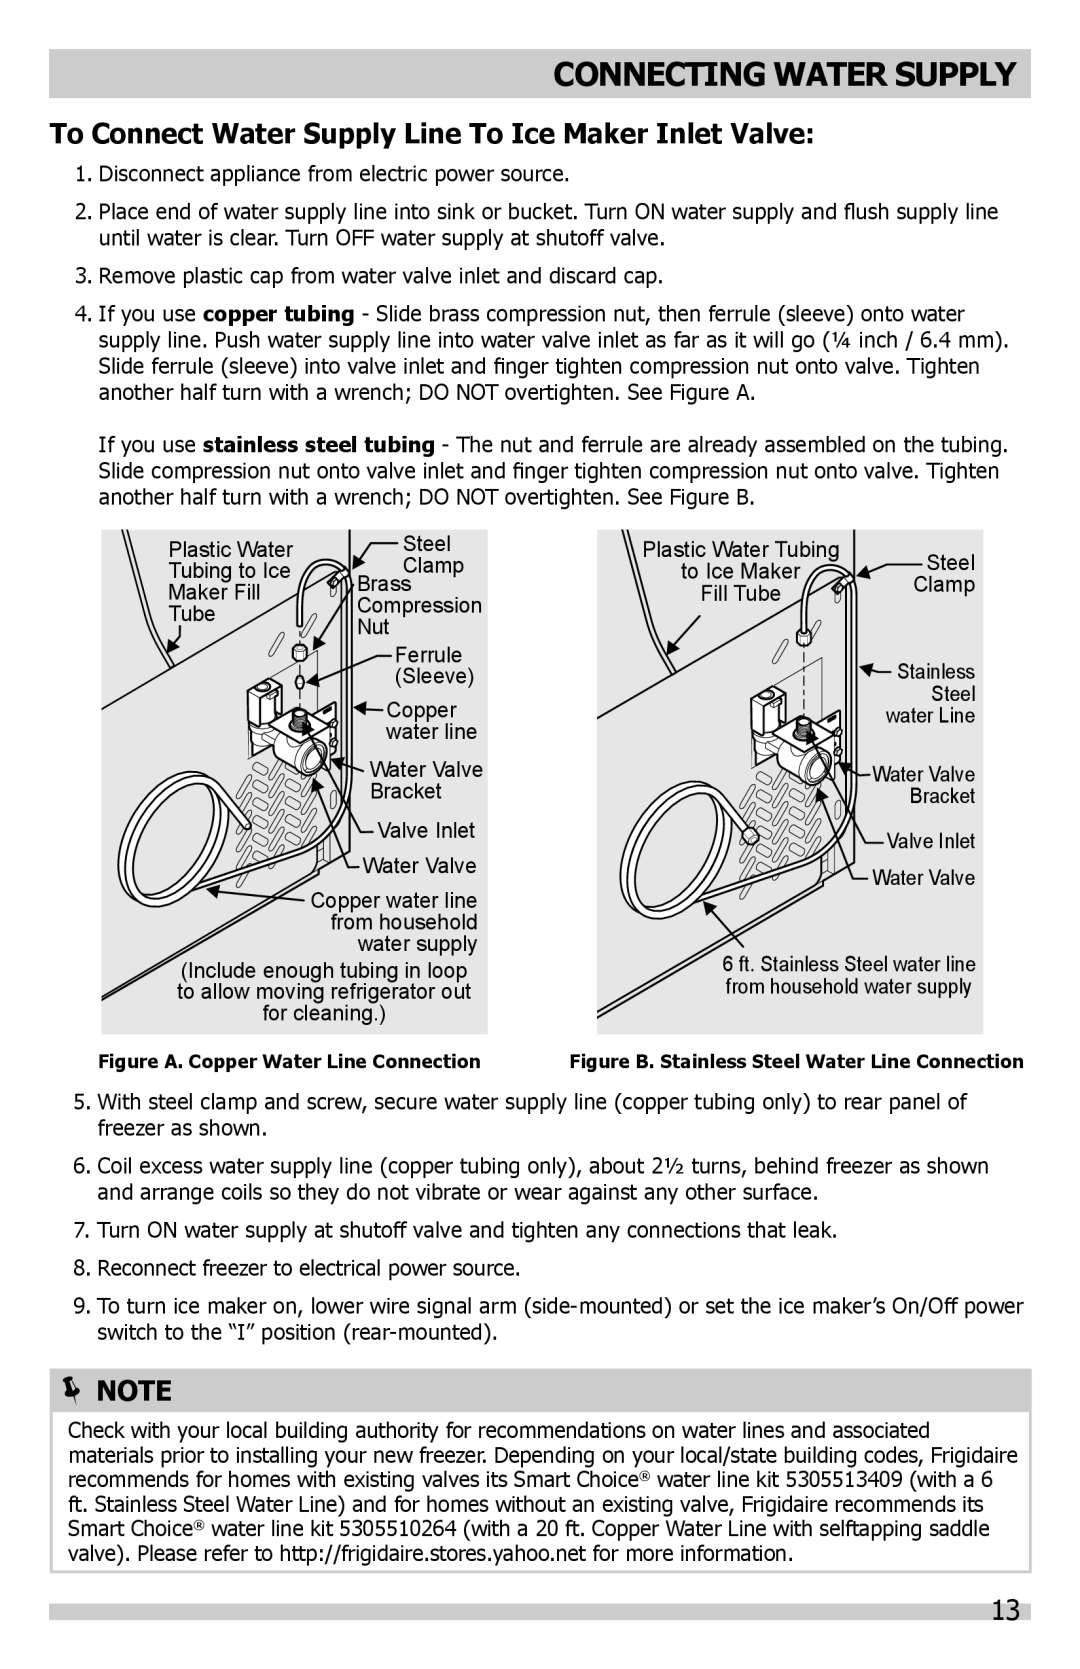 Frigidaire A01060901 manual To Connect Water Supply Line To Ice Maker Inlet Valve, Connecting Water Supply,  Note 